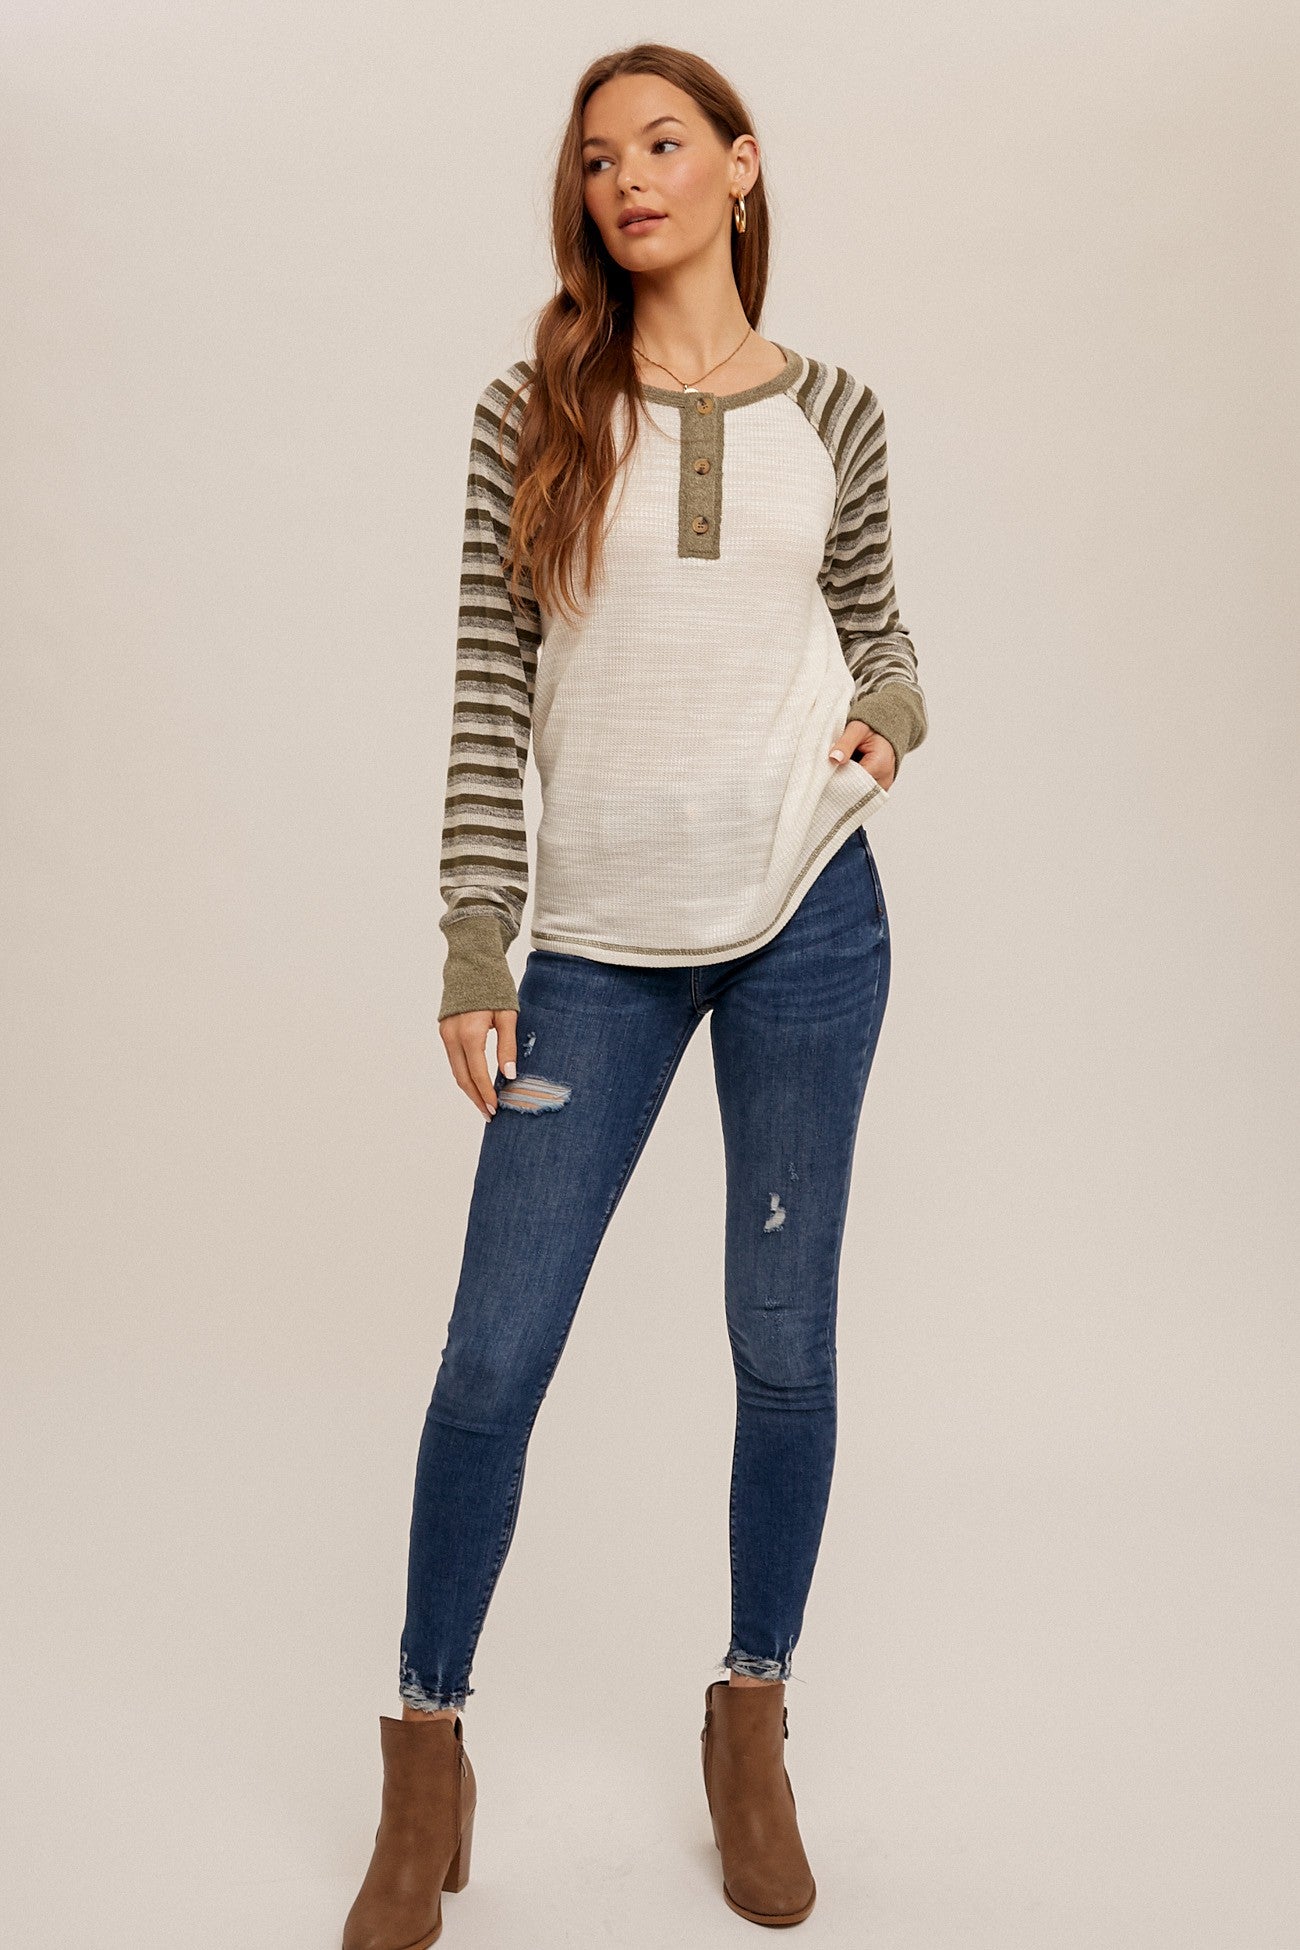 Olive Striped Contrast Knit Henley Top